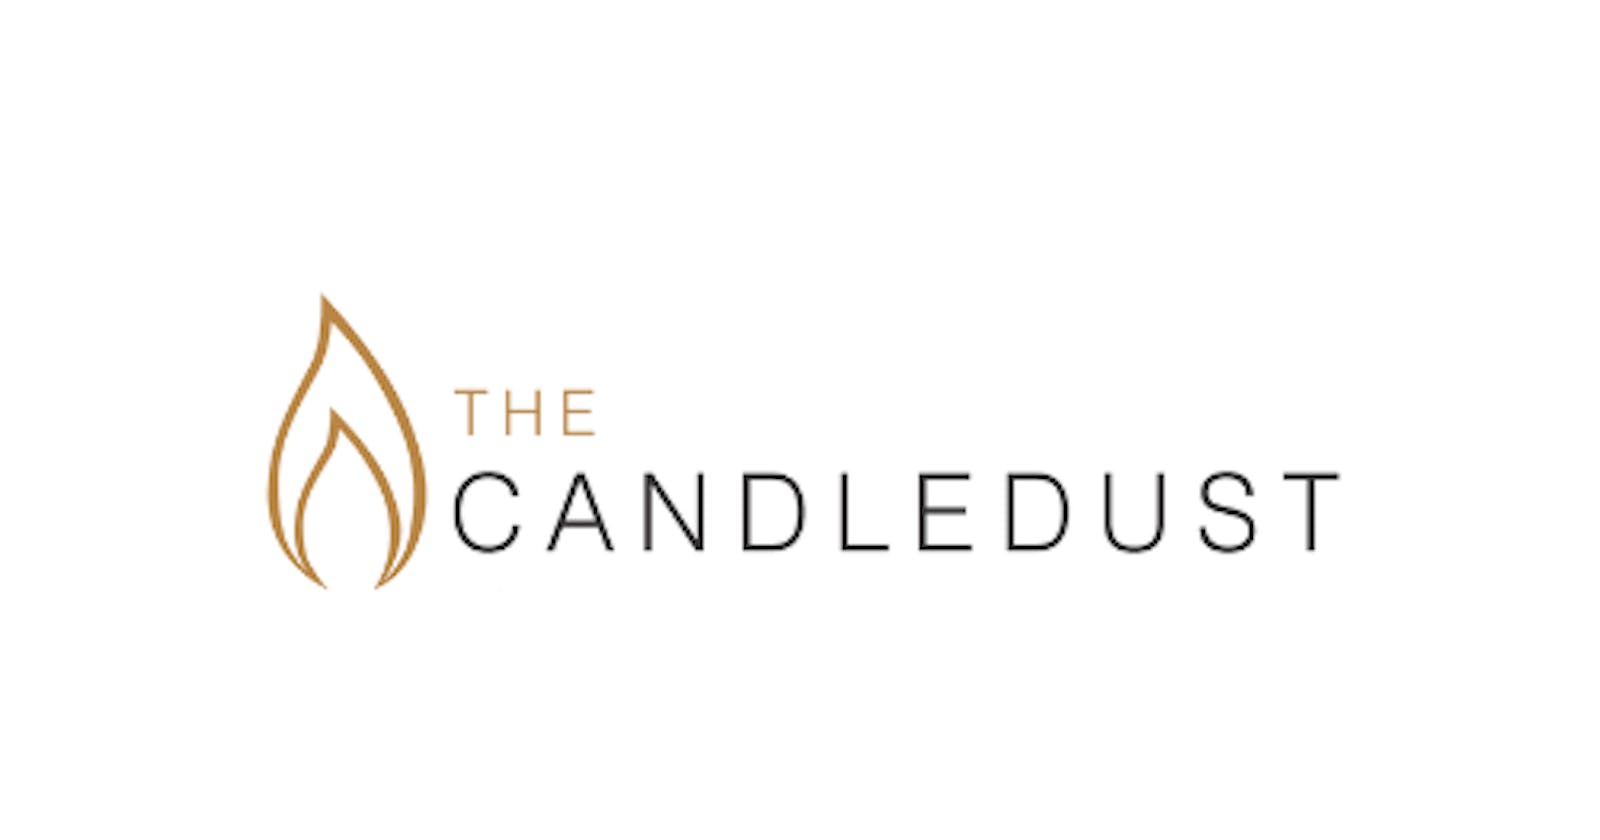 The Candledust's Wax Powder For Candles - A Sustainable Solution for More Personalized Space